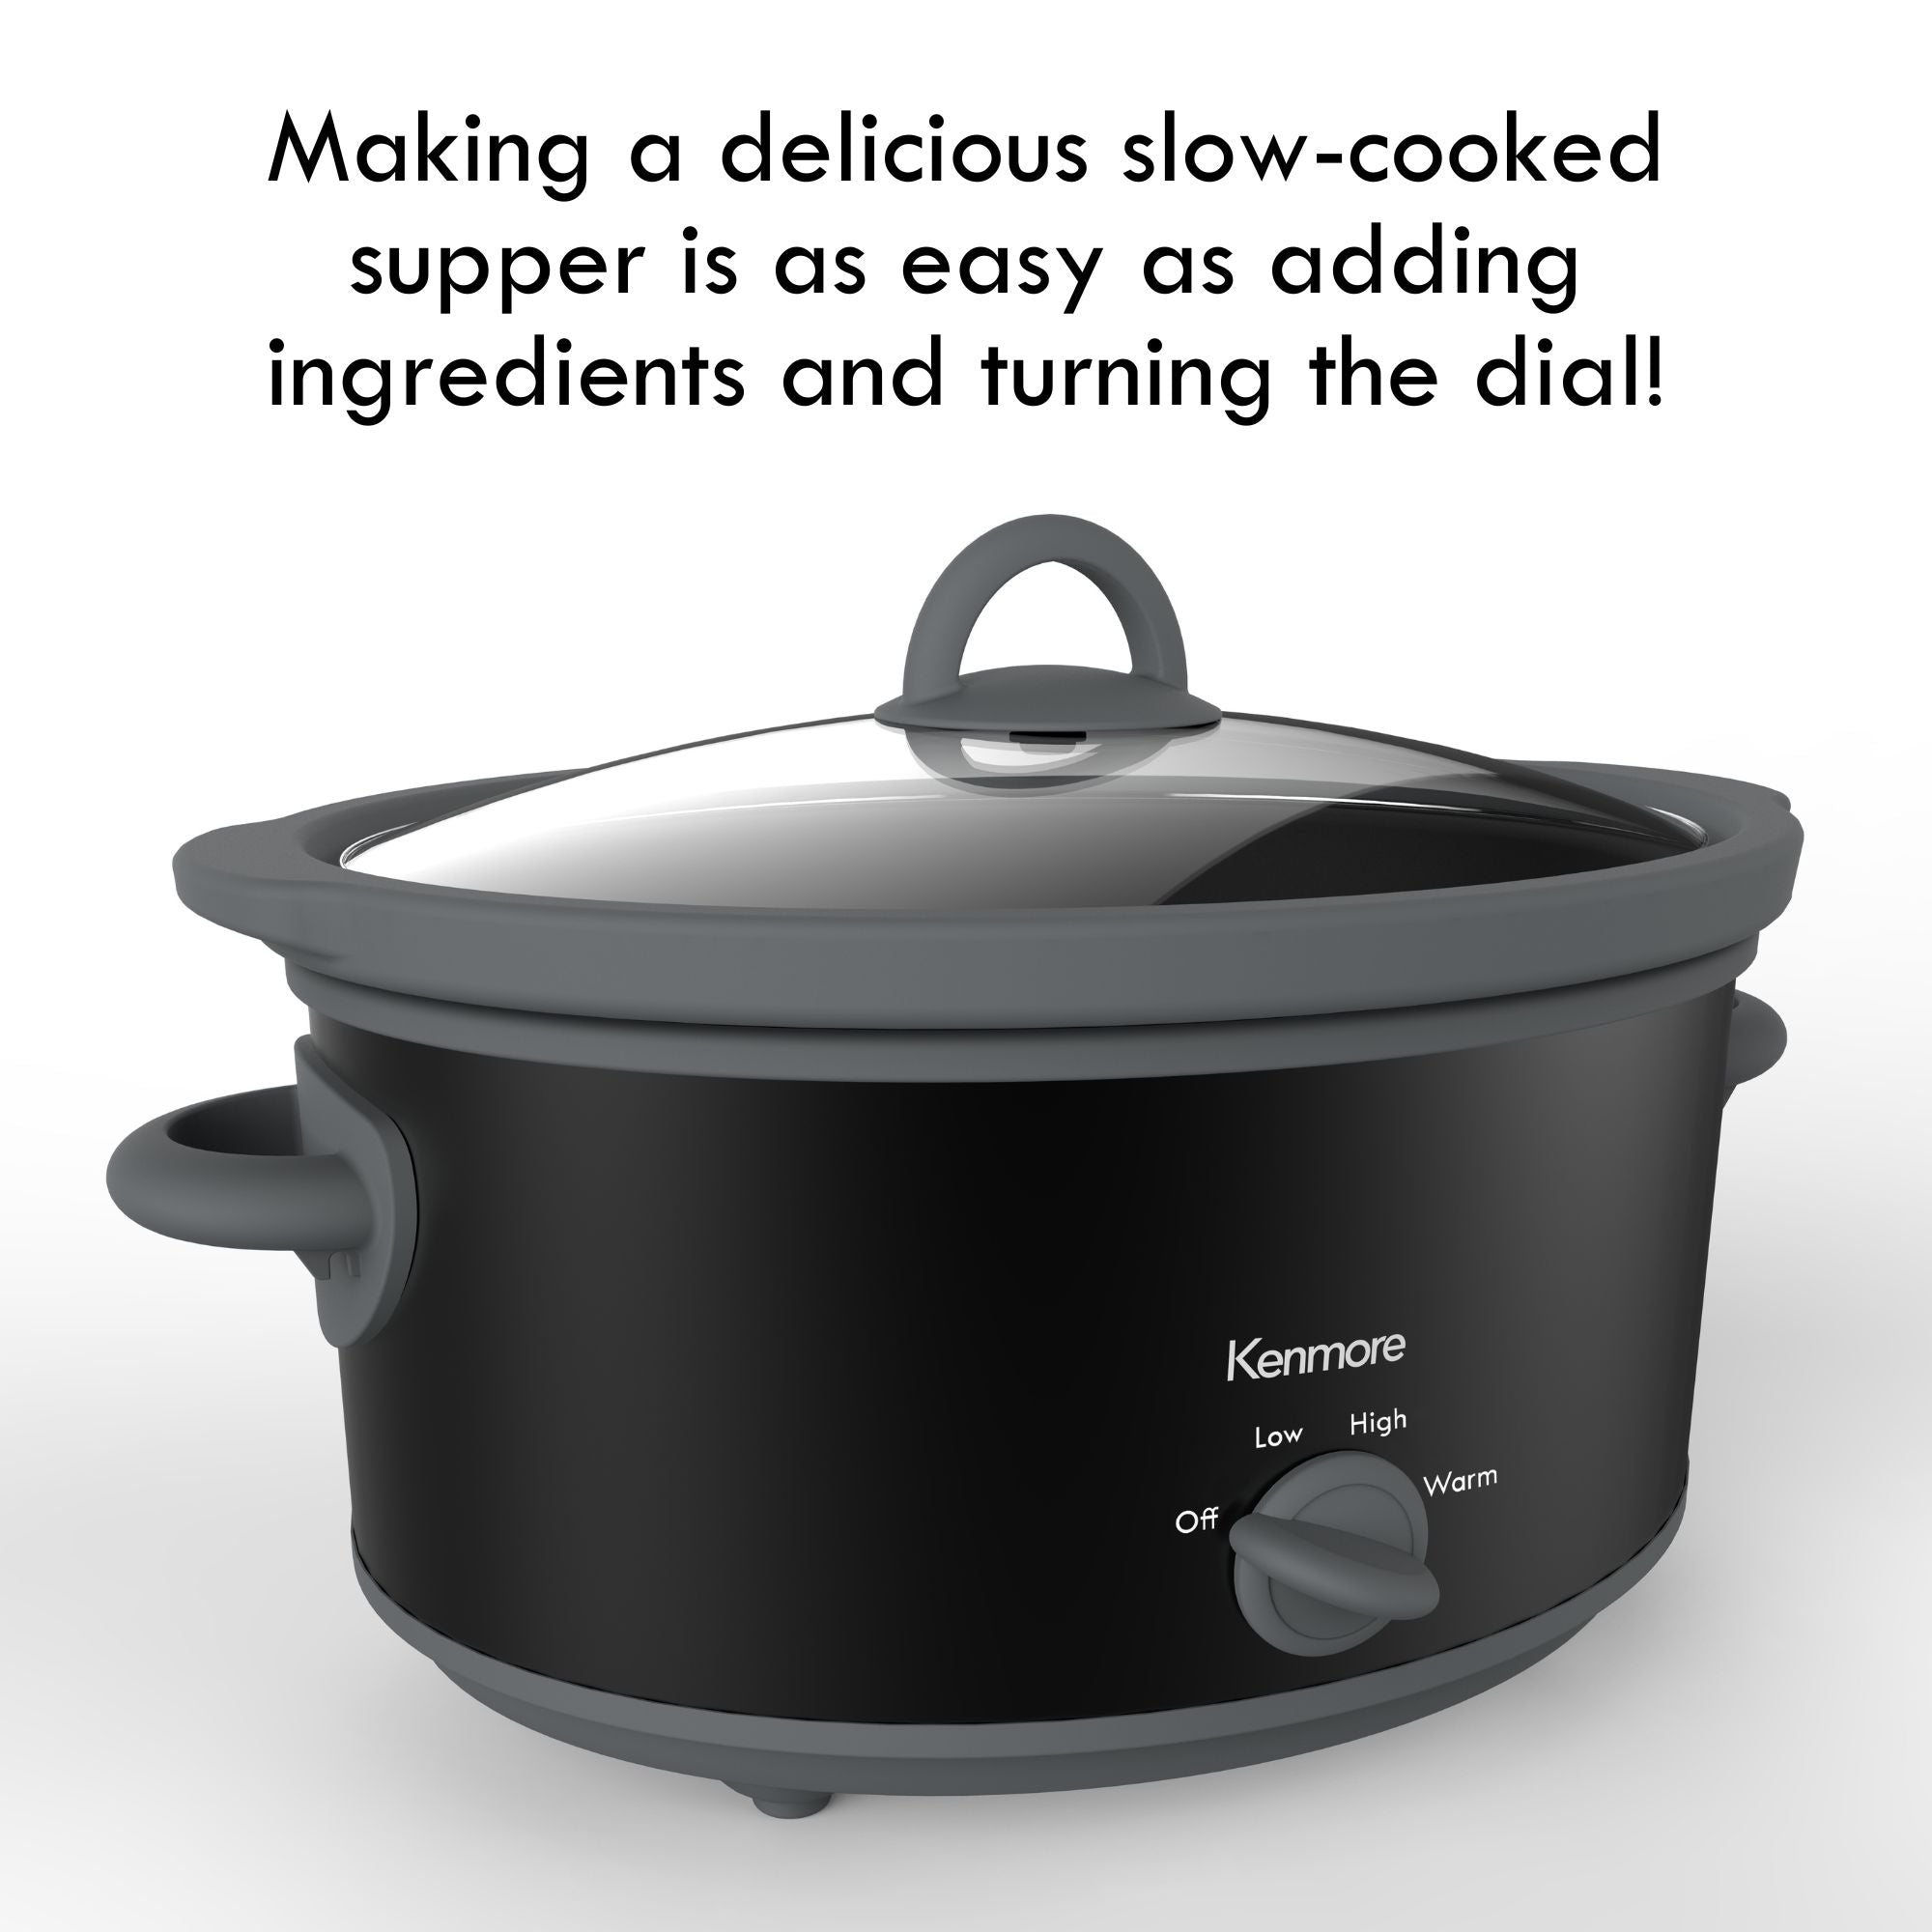 Kenmore 5 quart black slow cooker on a white background with text above reading, "Making a delicious slow-cooked supper is as easy as adding ingredients and turning the dial!"